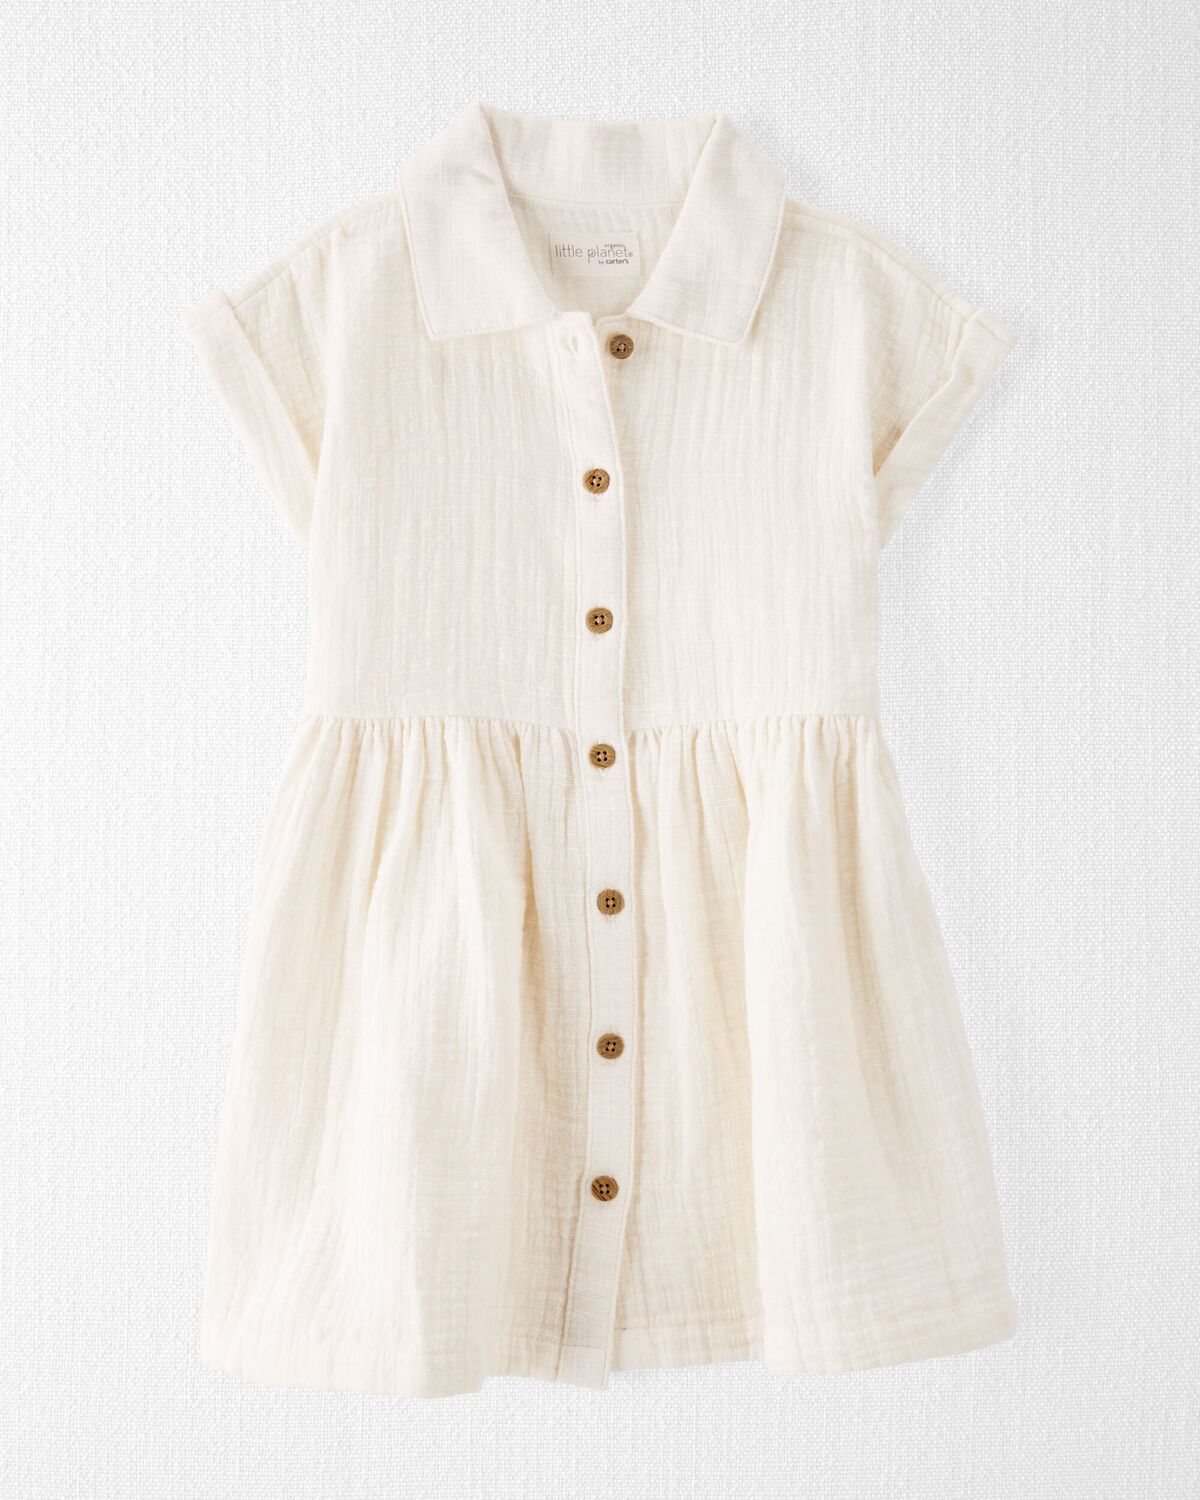 Toddler Organic Cotton Button-Front Dress in Cream | Carter's